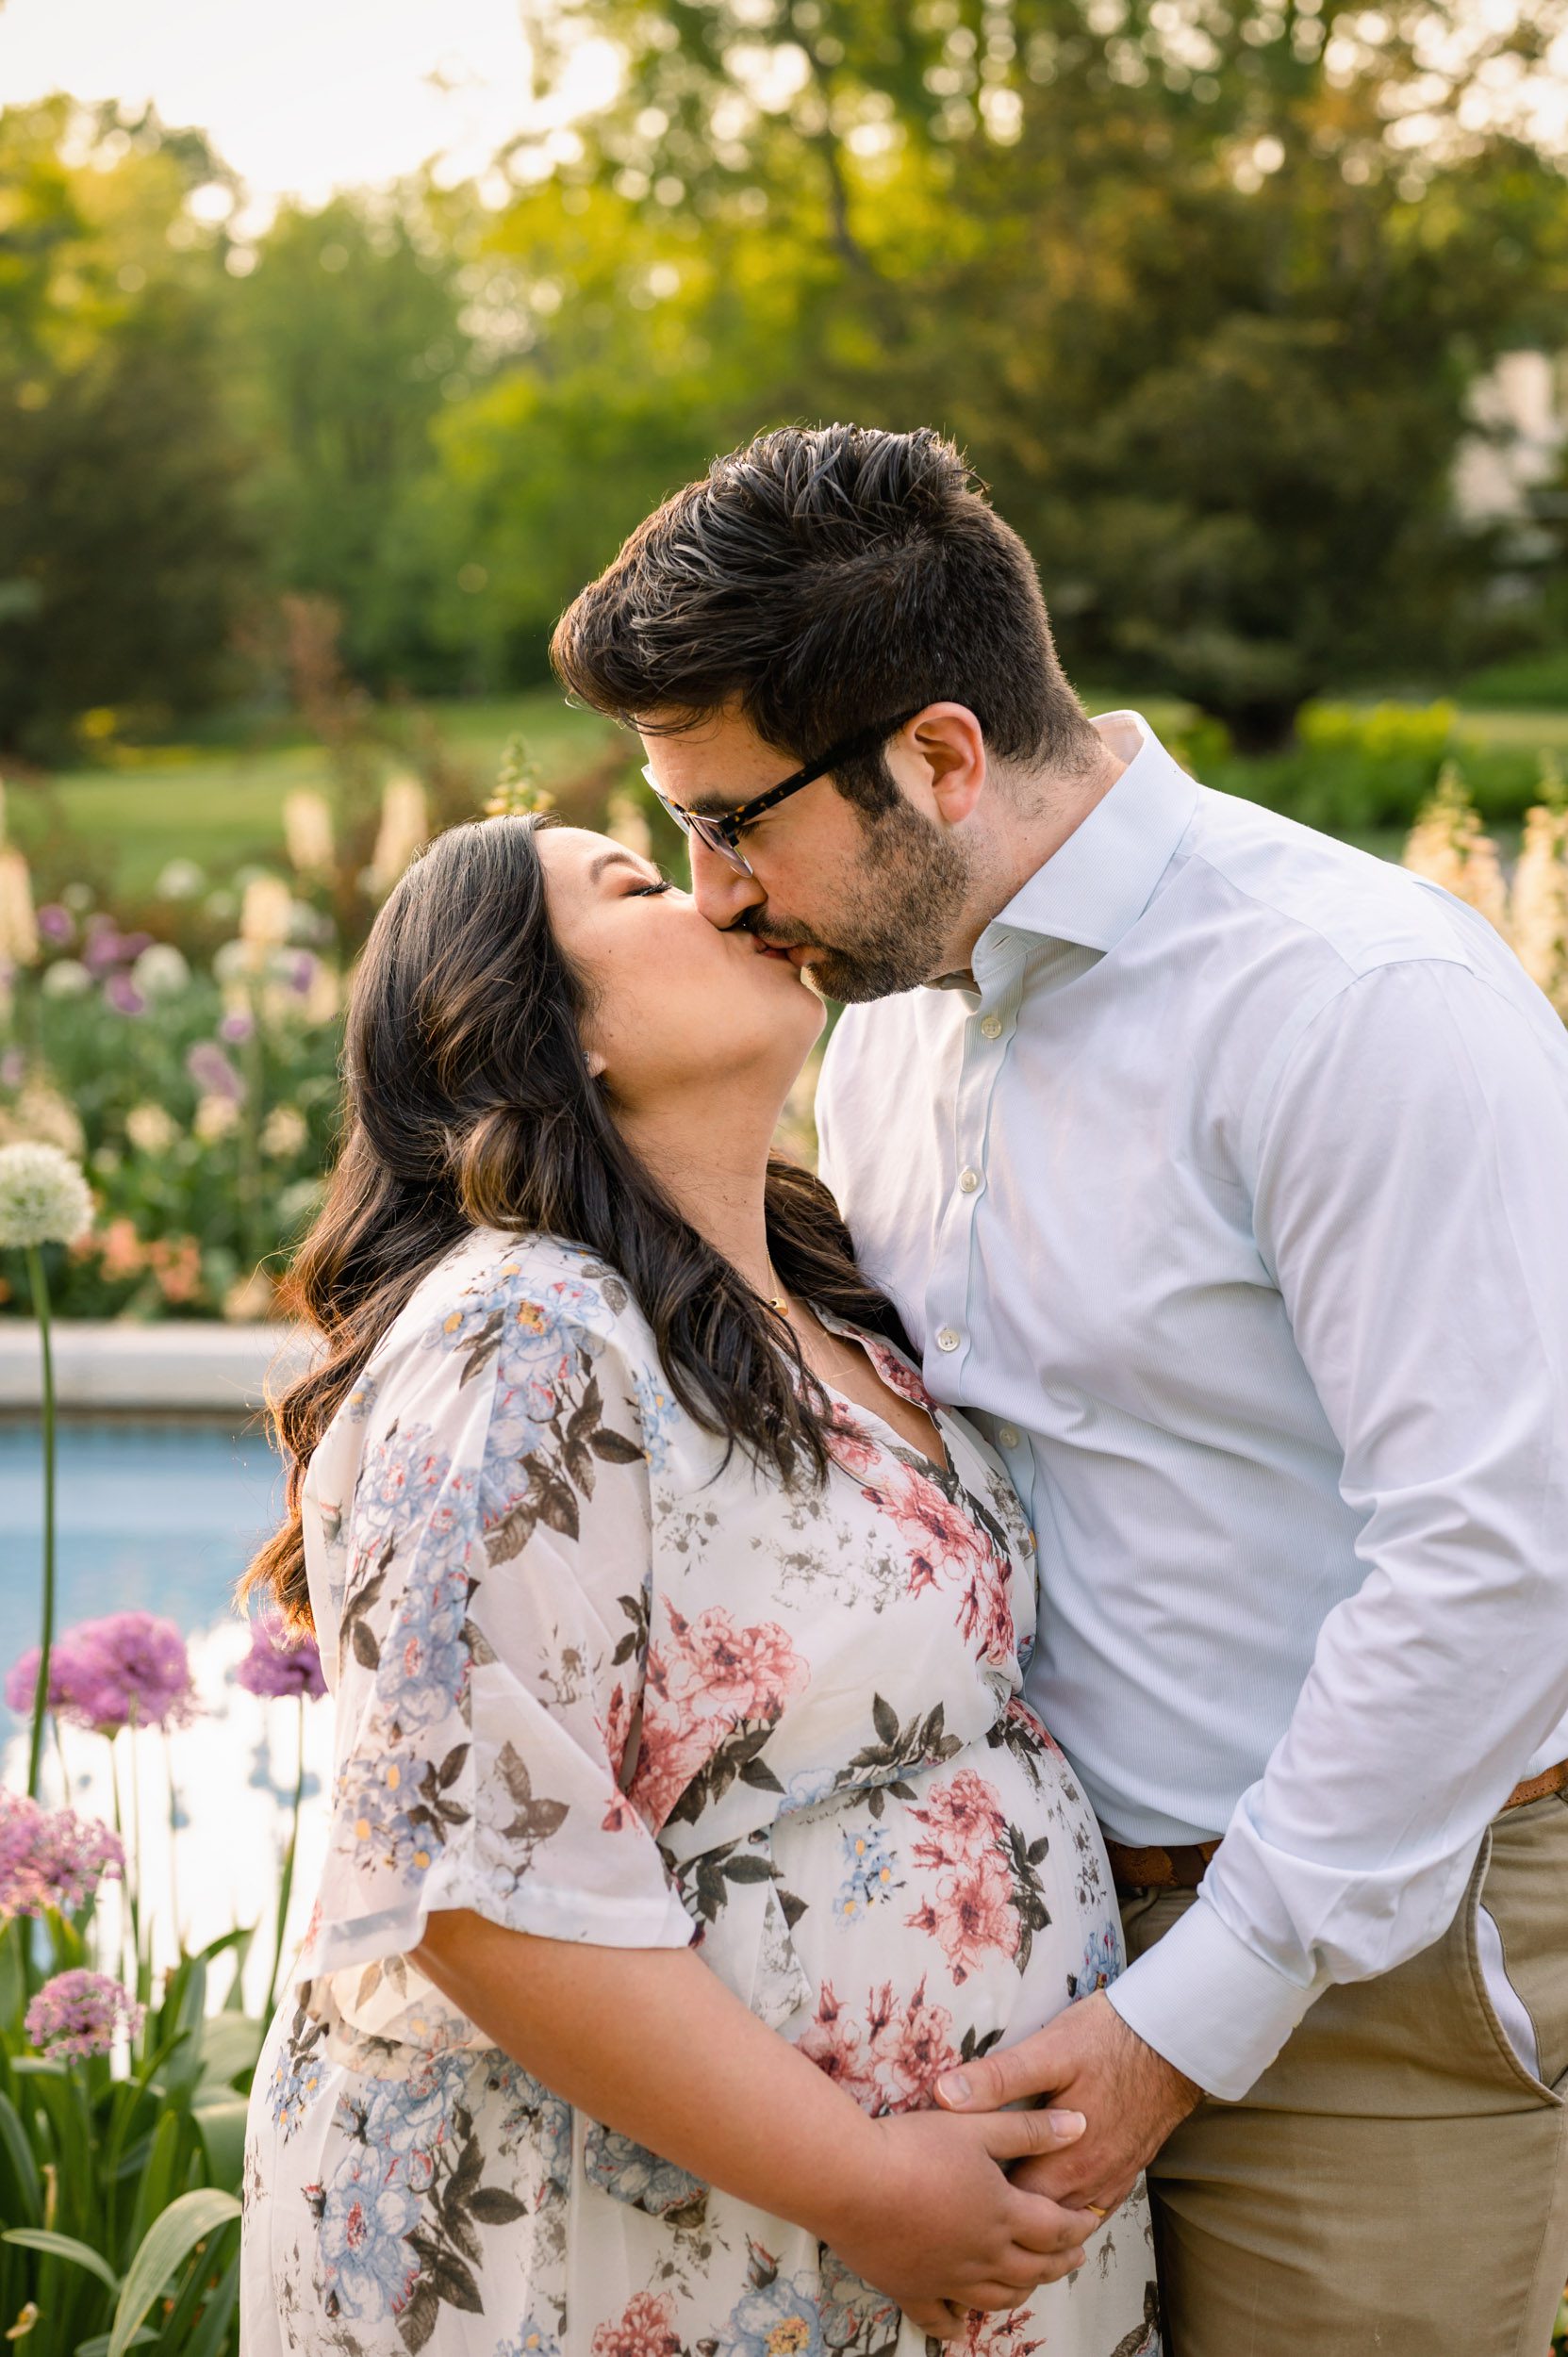 expecting parents standing in front of a fountain surrounded by flowers in bloom and kissing each other as they both touch mom's belly during a Main Line maternity session